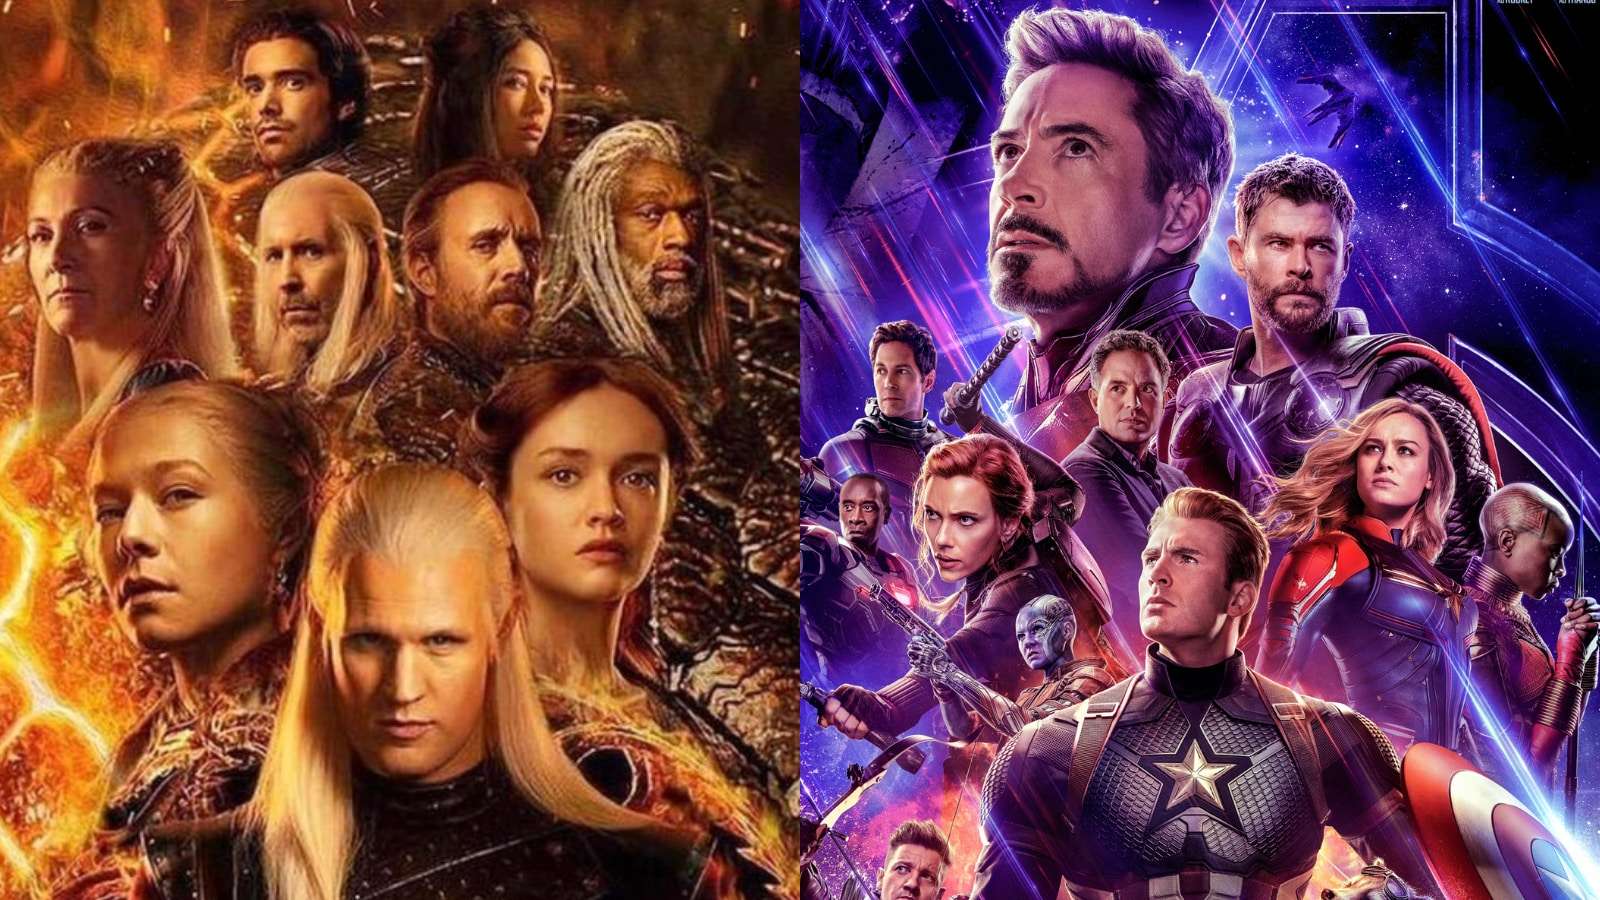 Game of Thrones prequel House of the Dragon poster and Avengers Endgame poster